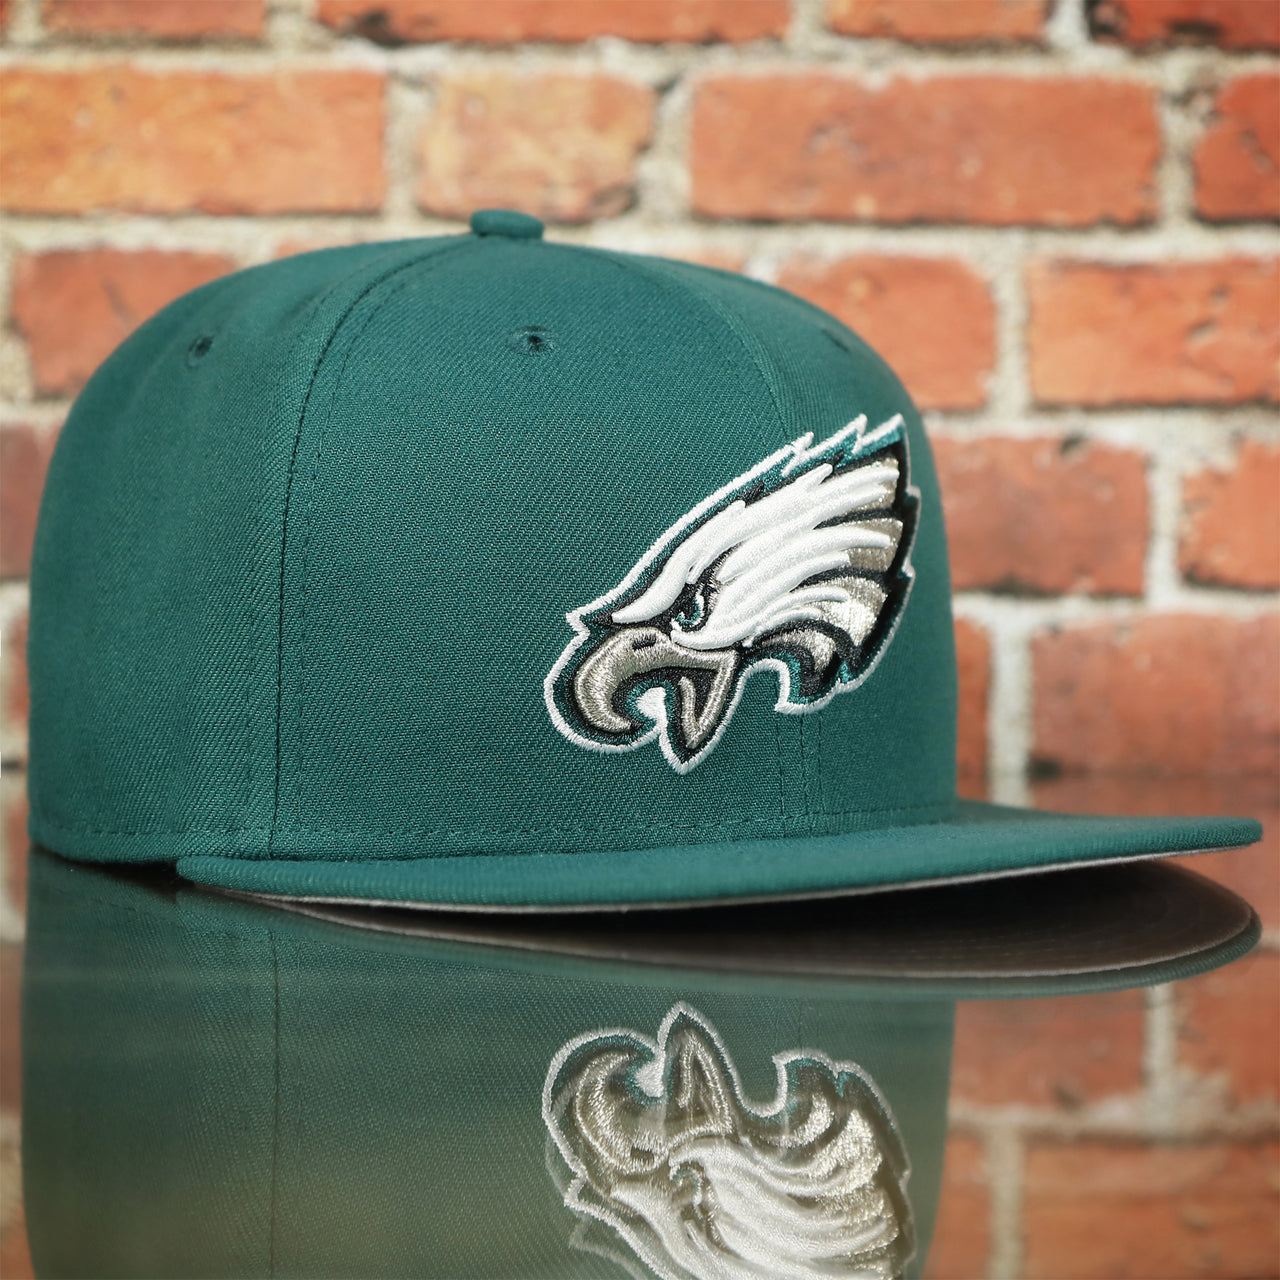 EAGLES Fitted hat on field current logo pine green colorway with metallic and white logo | 59FIFTY (5950) FITTED CAP | PINE NEEDLE GREEN